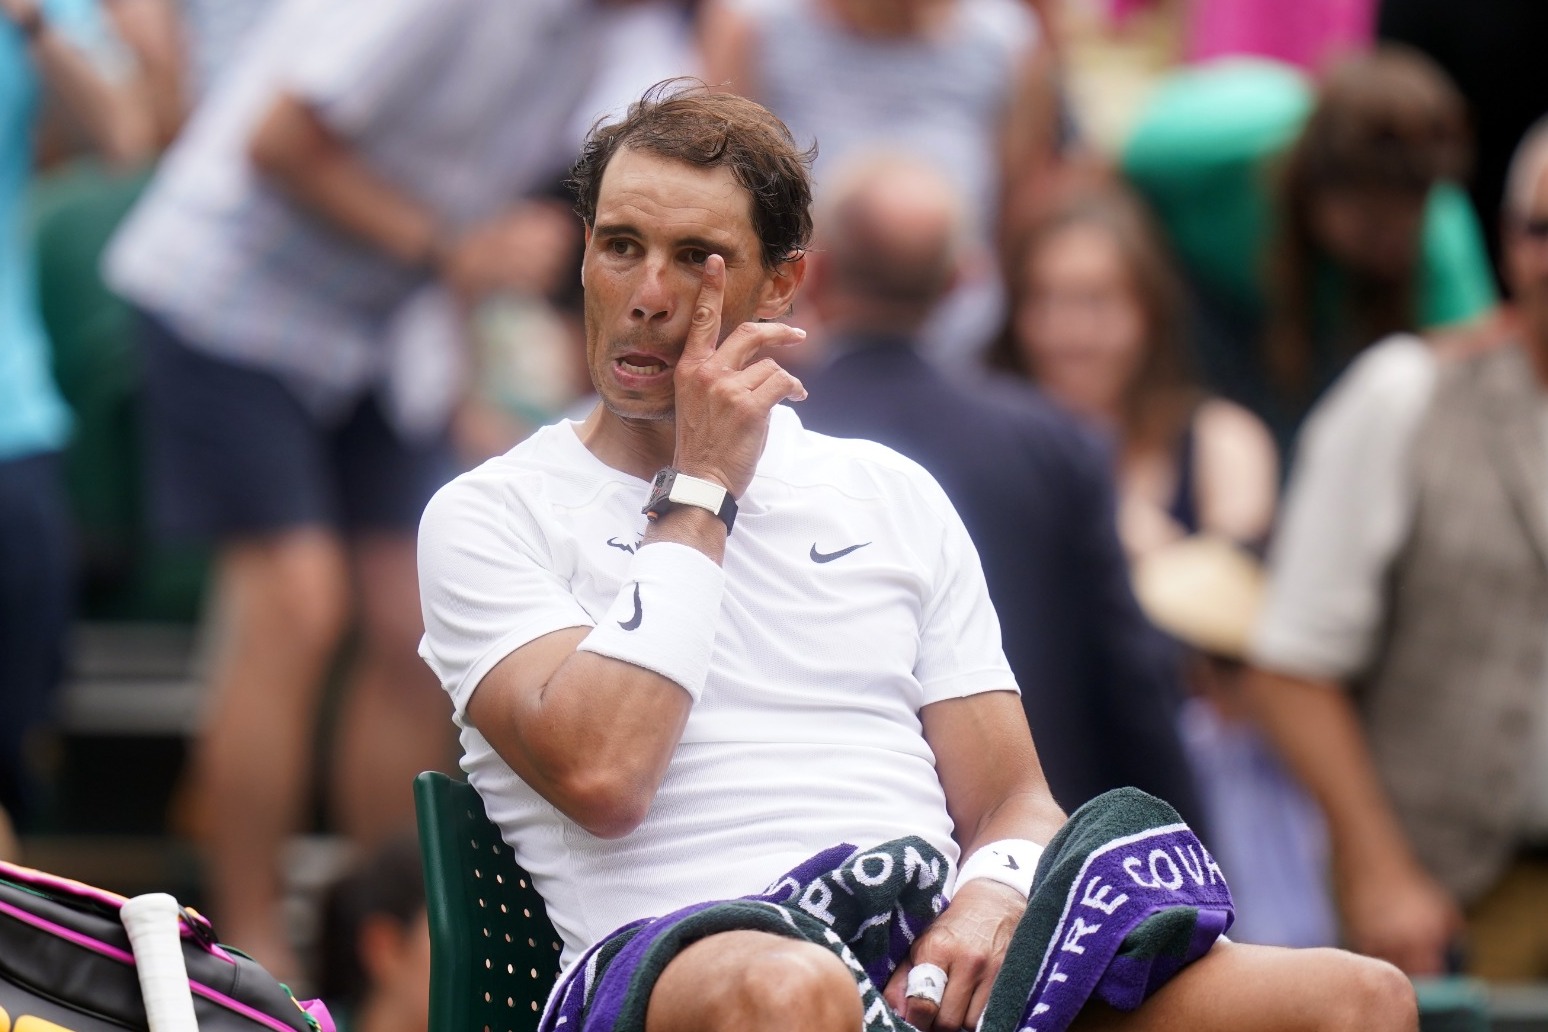 Rafael Nadal withdraws from Wimbledon due to injury 